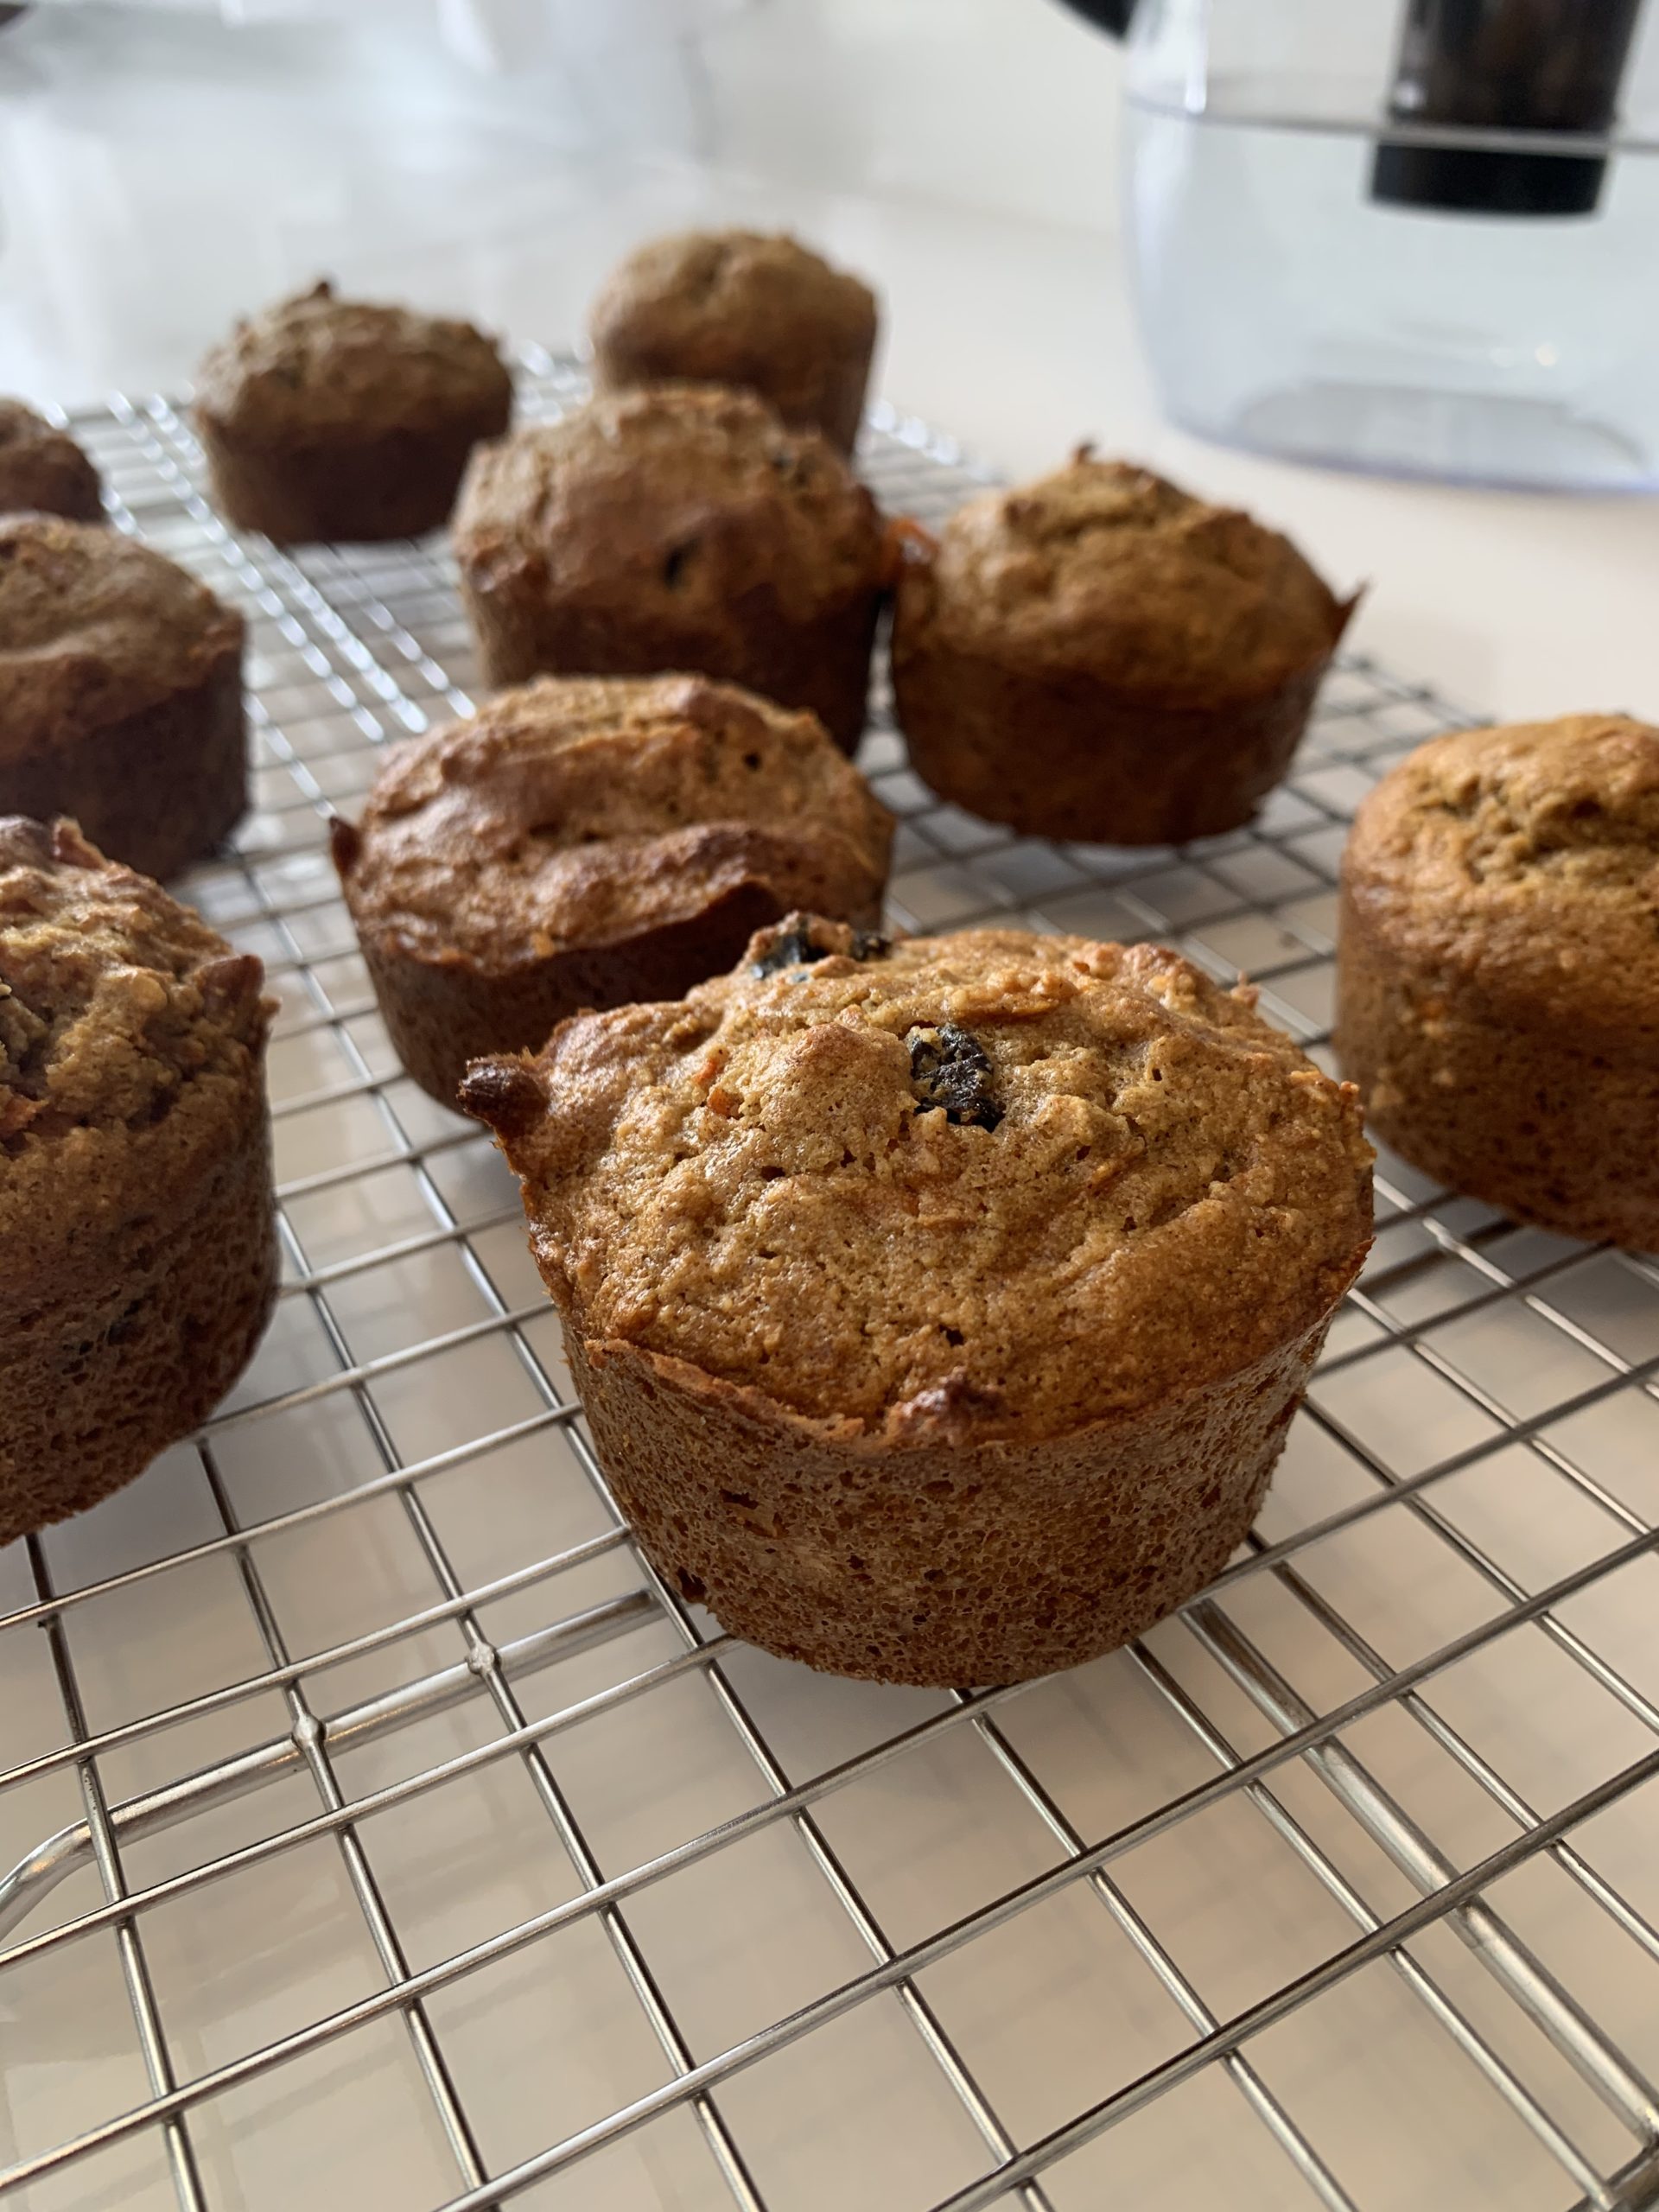 Many spiced carrot-raisin muffins cooling on a cooling rack in a kitchen.